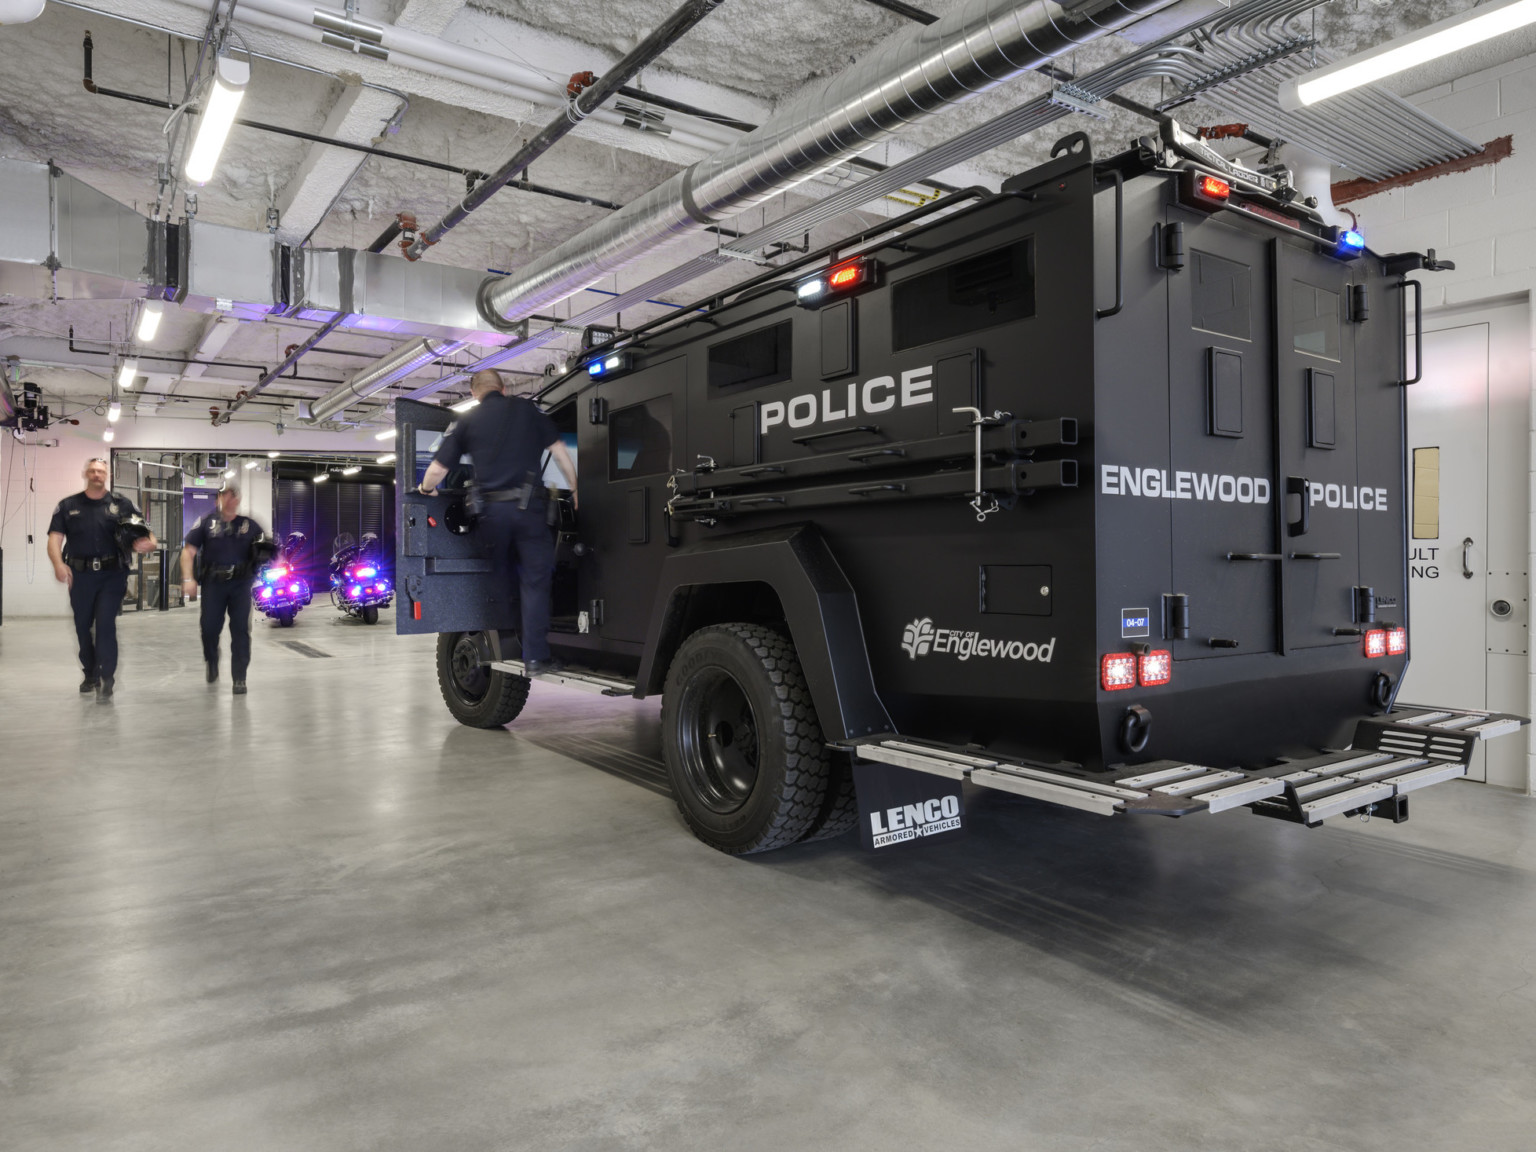 Englewood Police armored truck in garage with exposed ductwork and white pipes at textured white ceiling